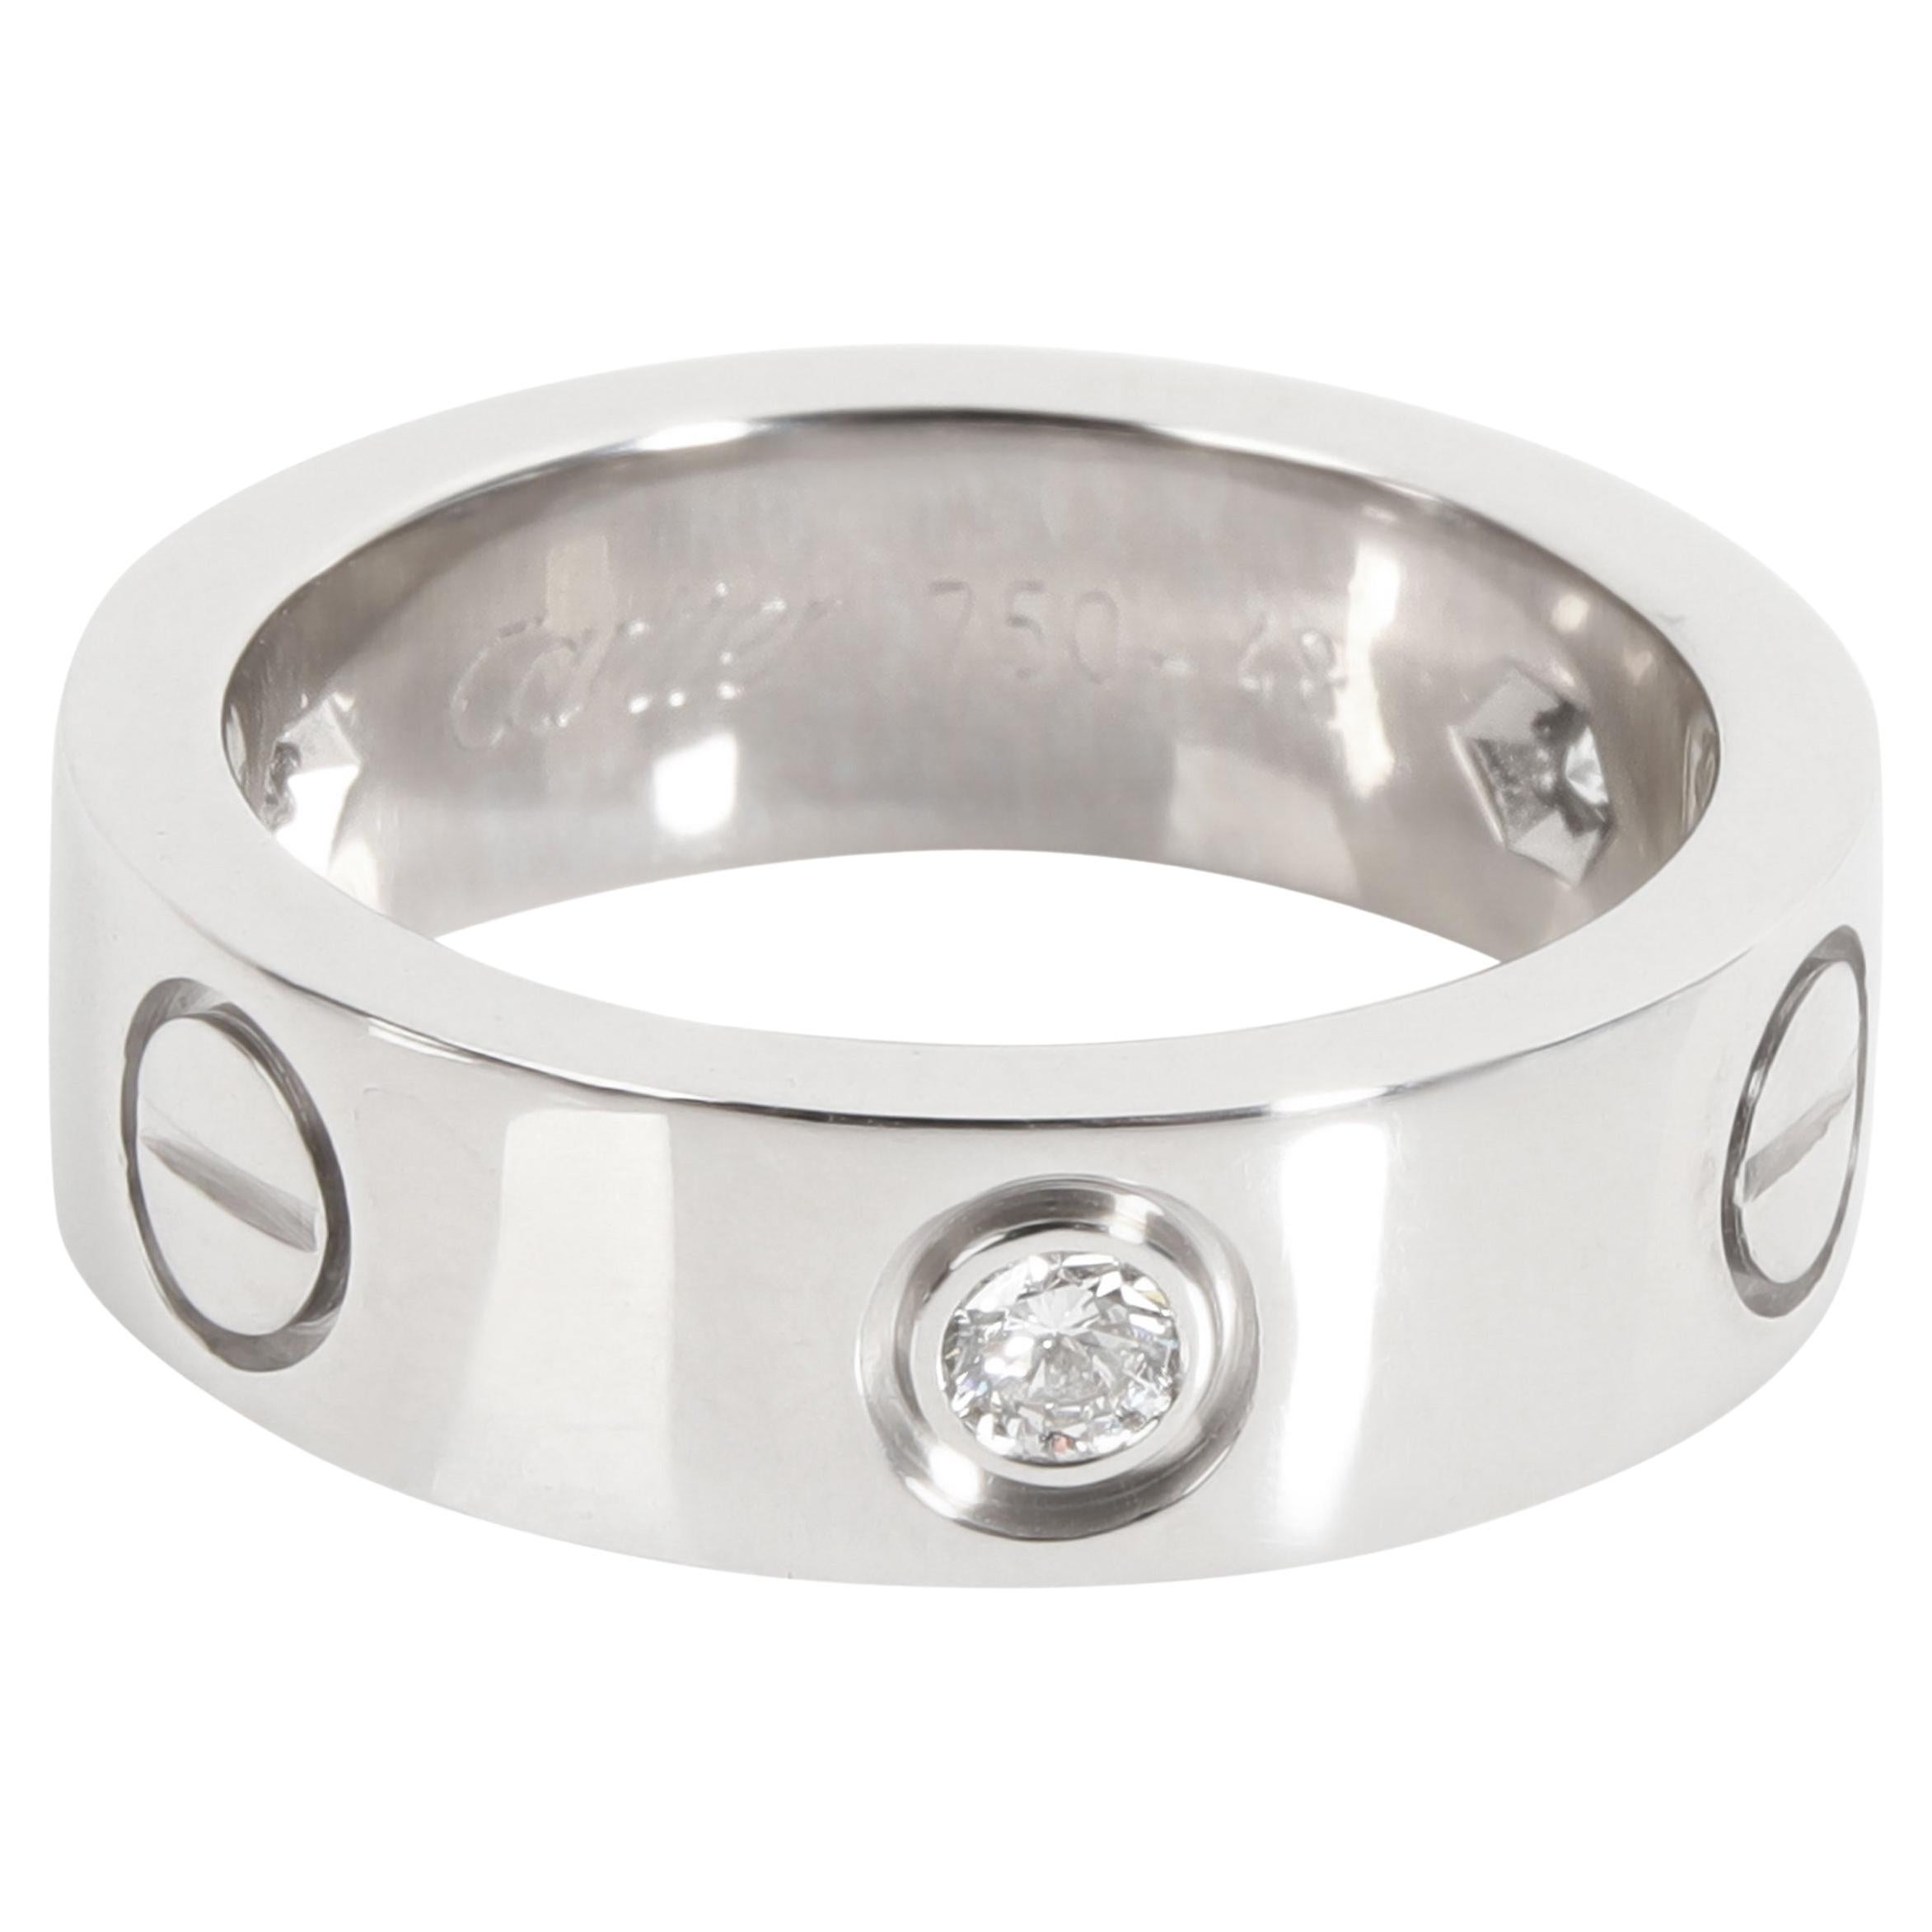 Cartier Love Diamond Ring in 18k White Gold 0.22 CTW For Sale